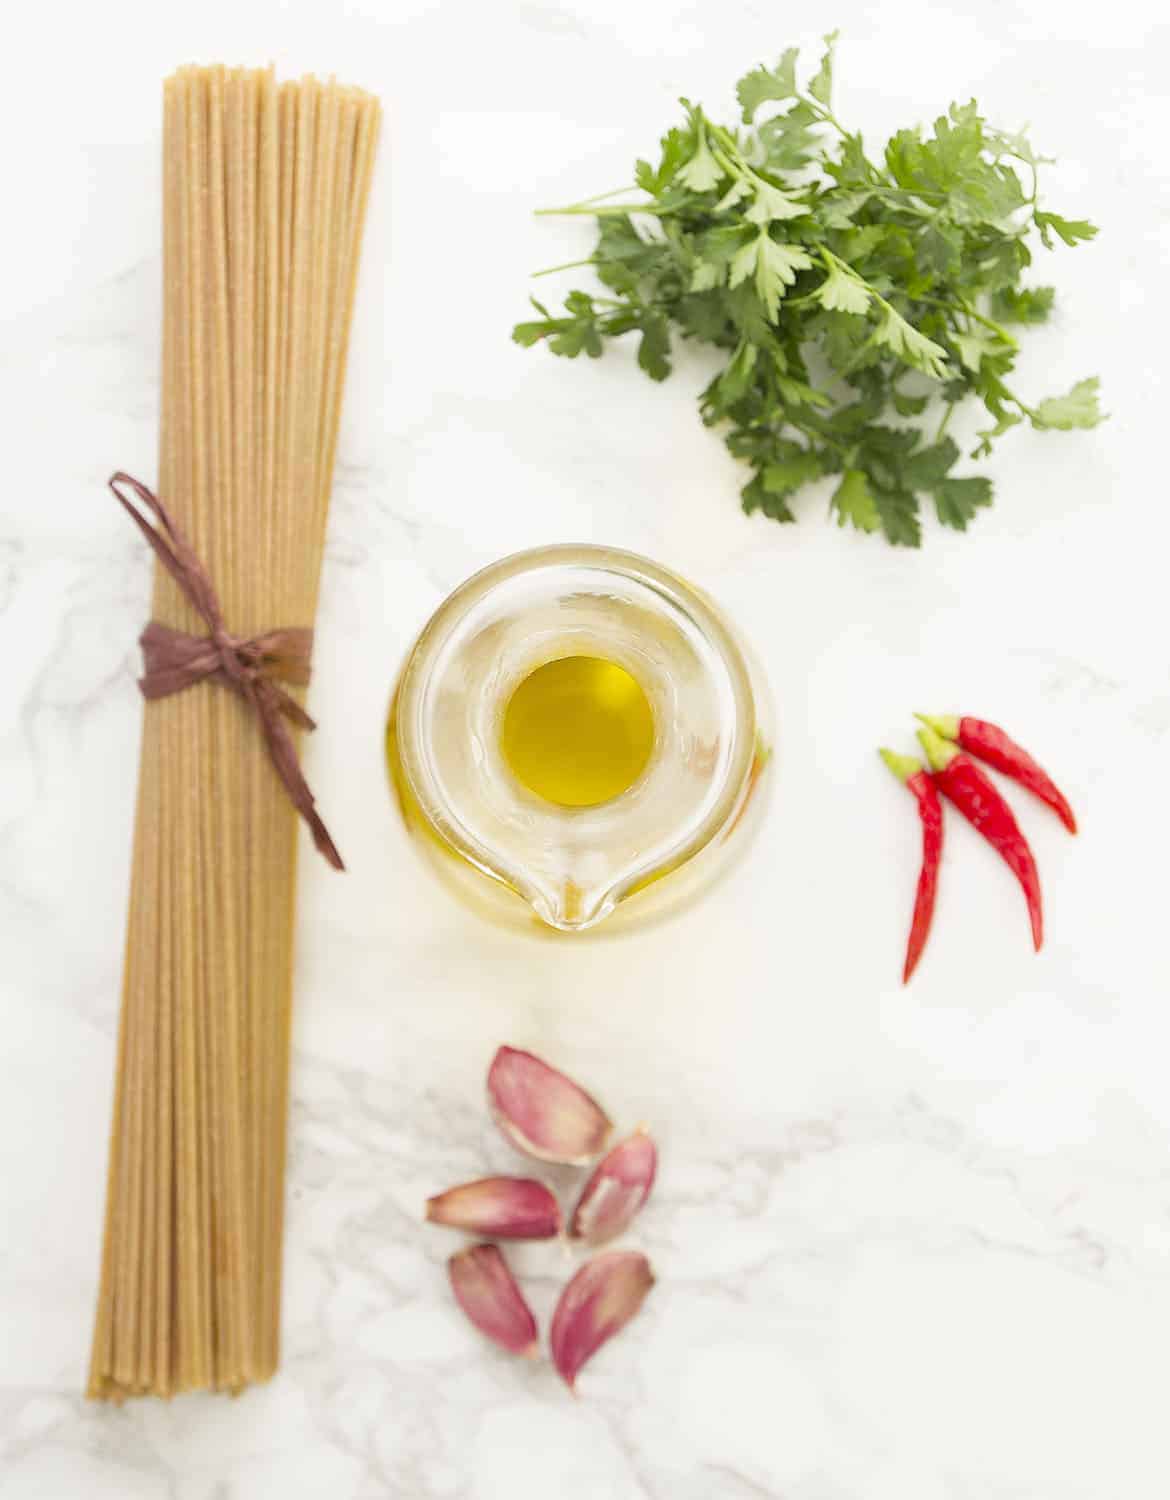 The ingredients for this pasta with garlic and olive oil are arranged on a white marble surface.